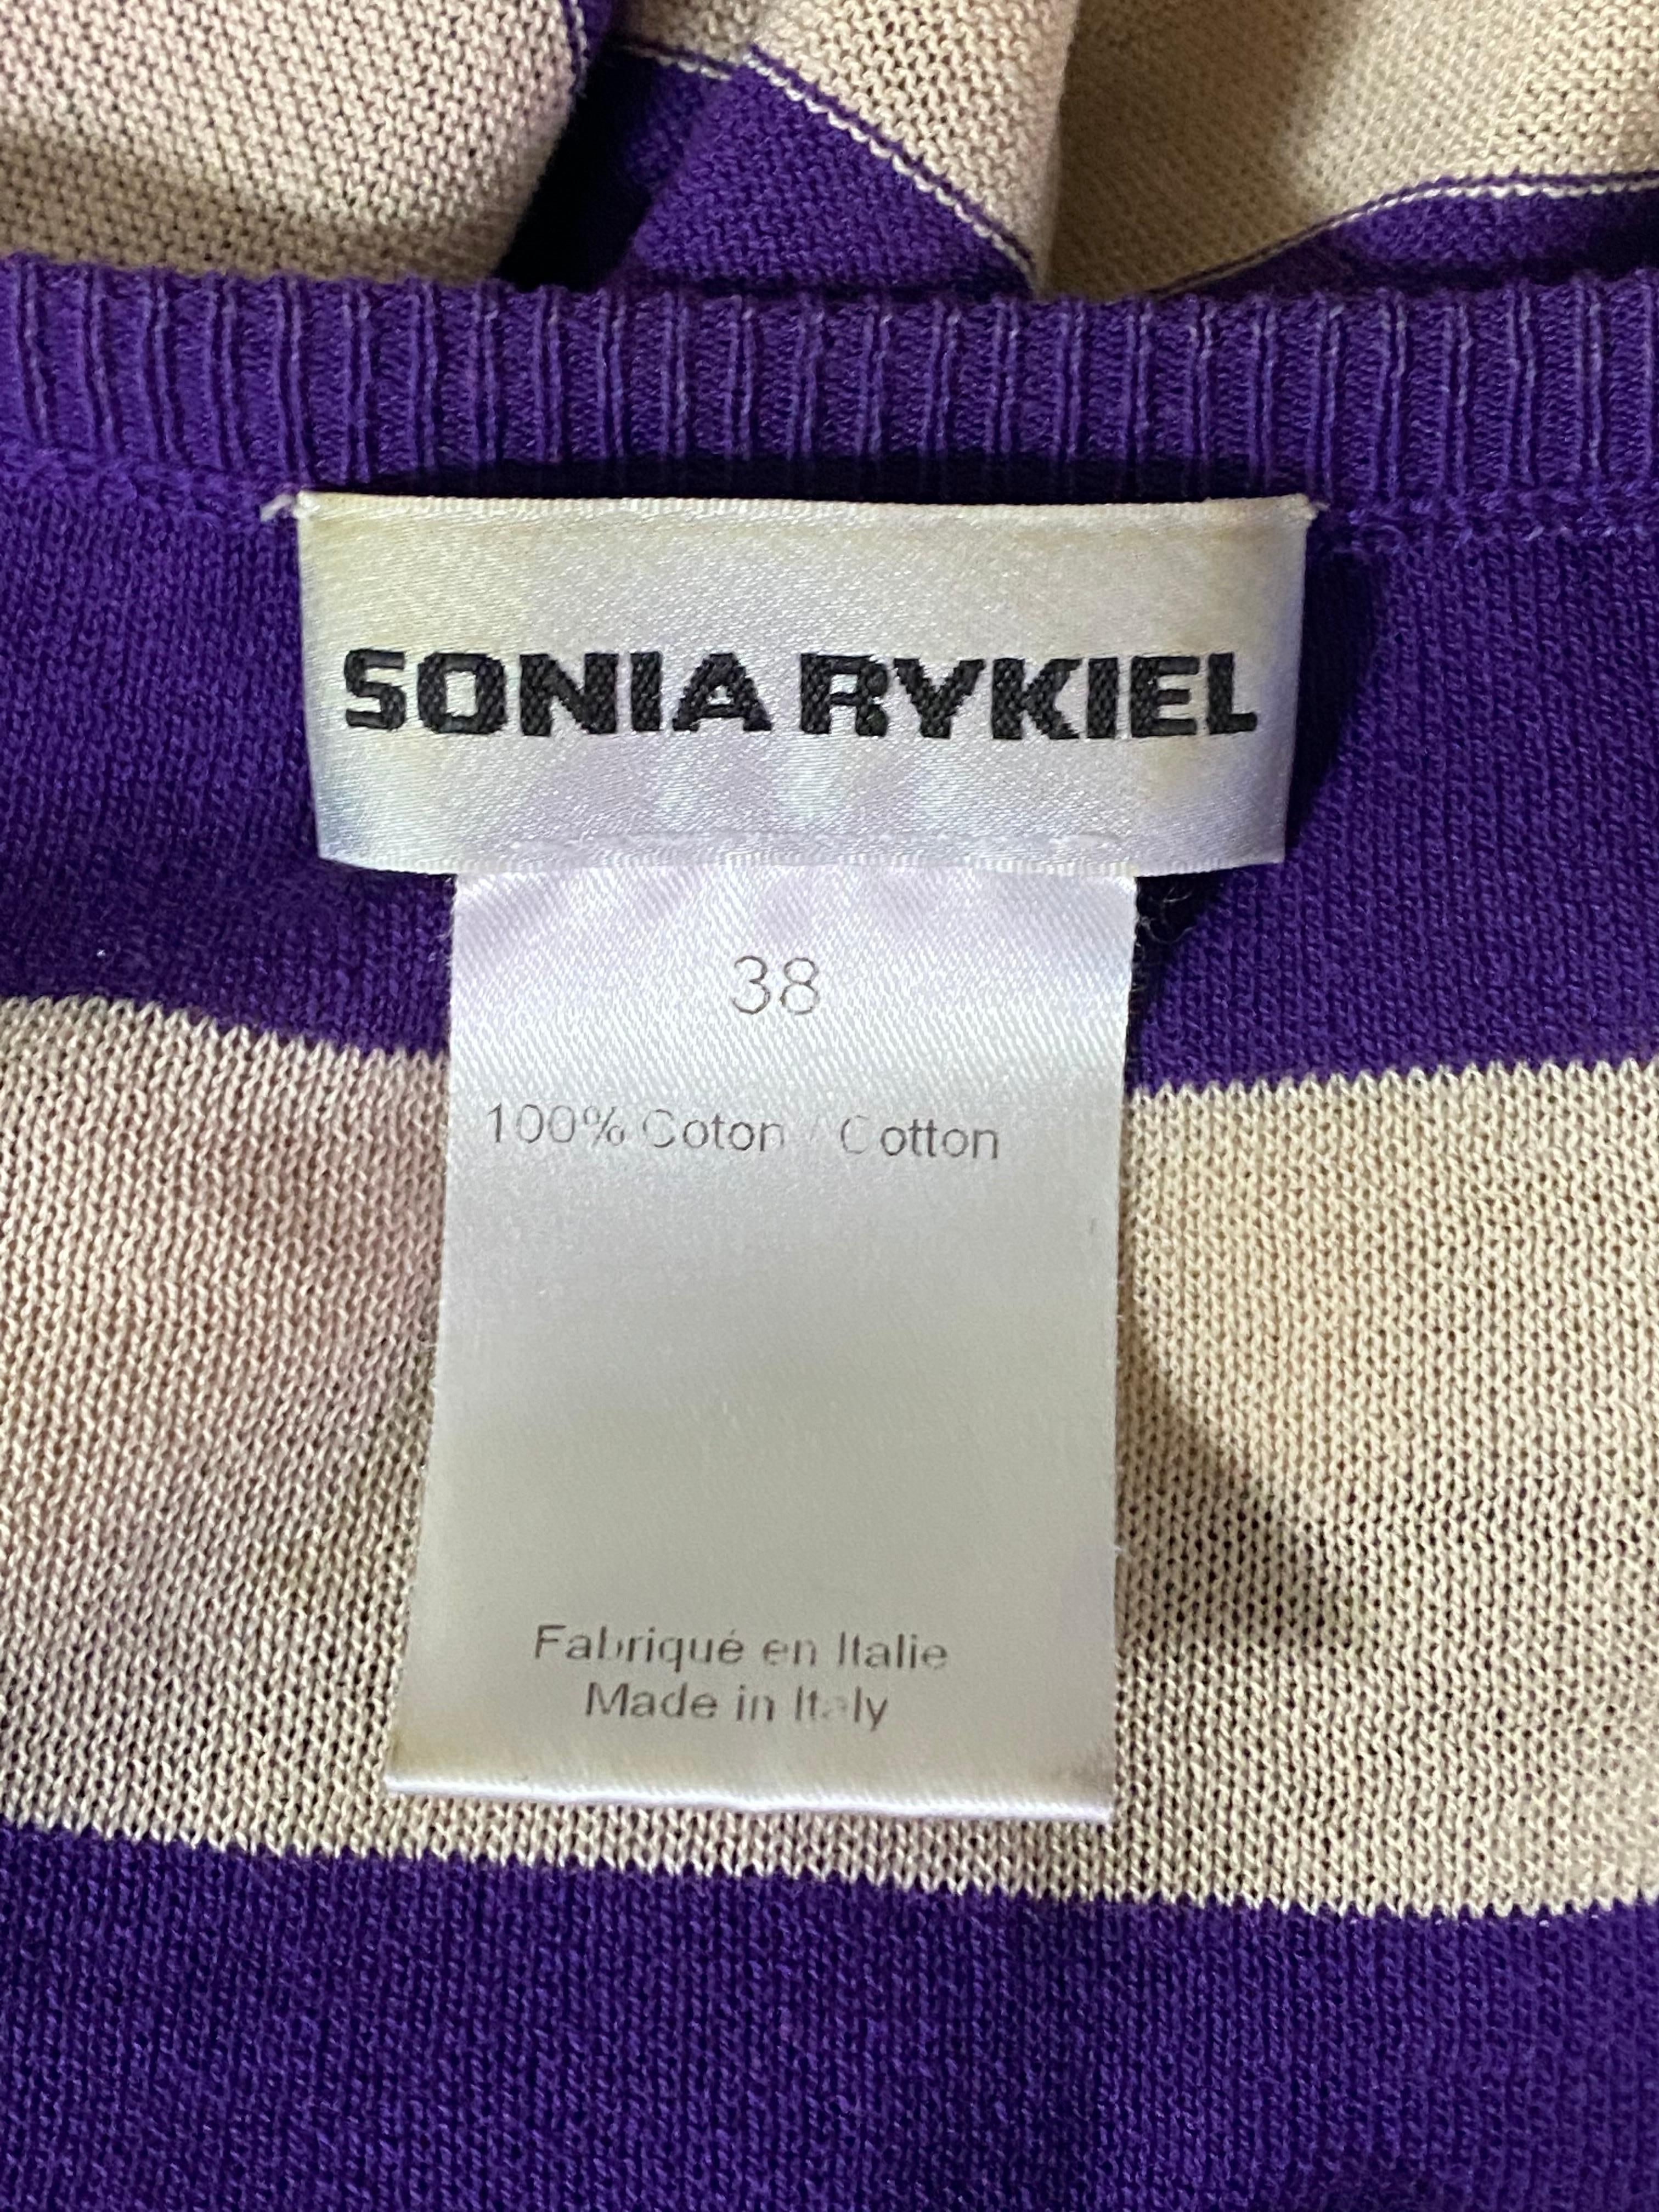 Vintage Sonia Rykiel Purple and Cream Striped Top, Size 38 For Sale 1